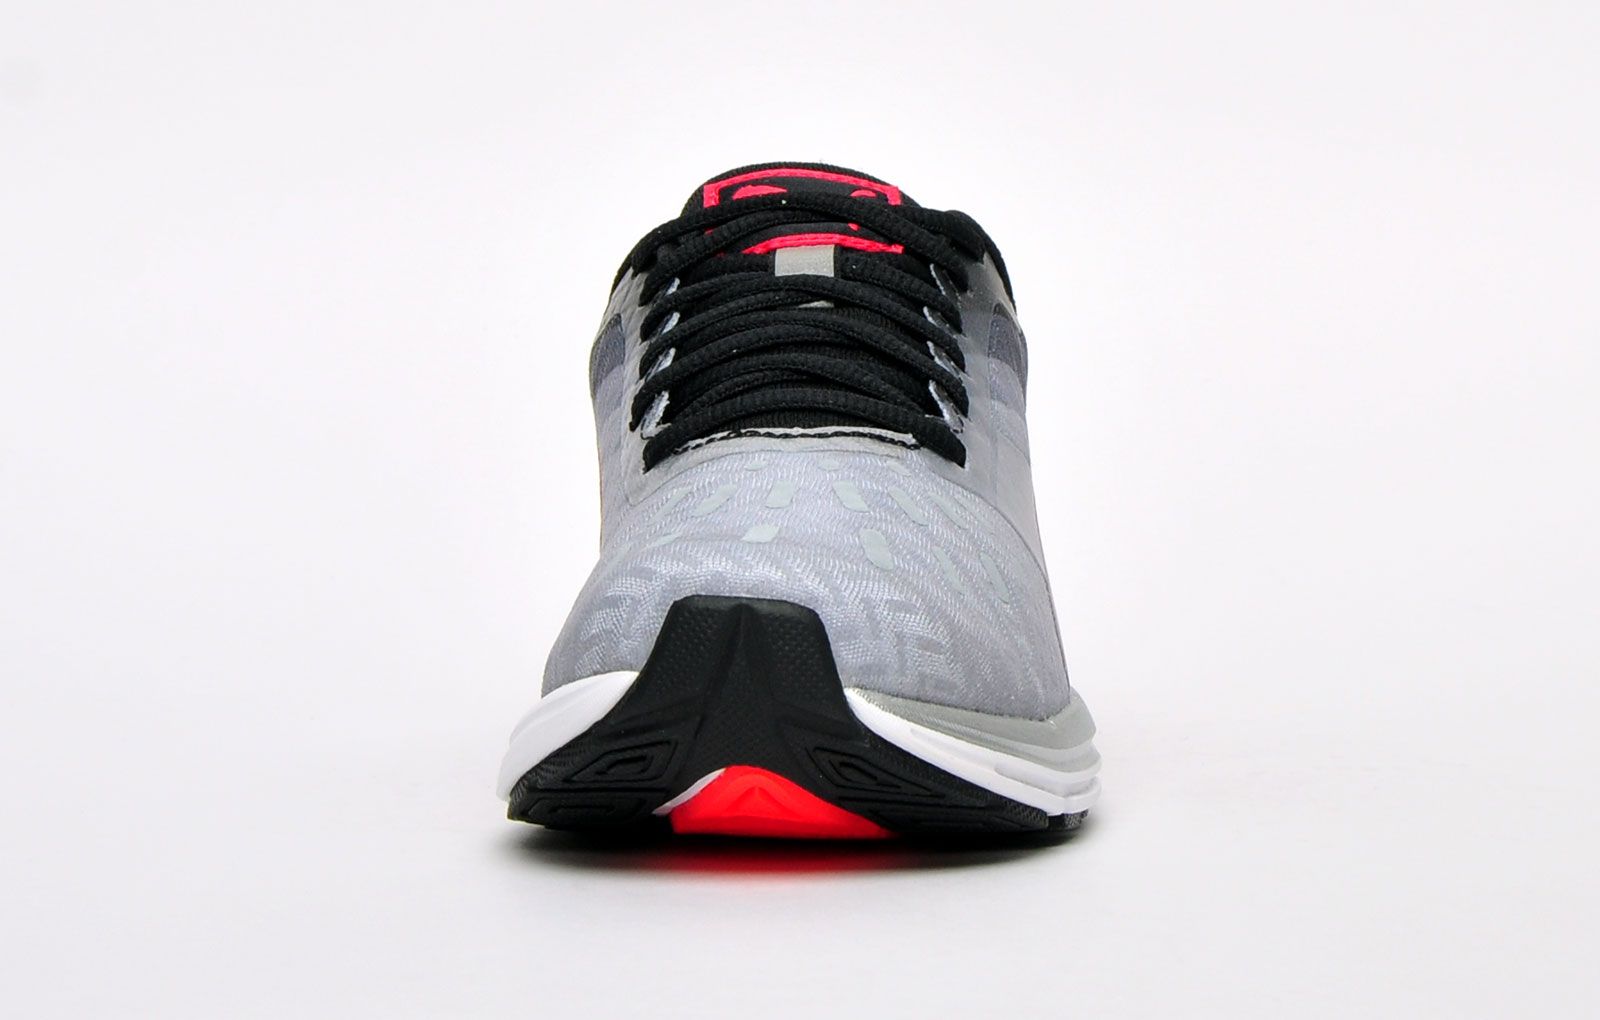 Built to perform, the Puma Speed 300 Ignite is an update to a fresh series of running shoes that are meant for the roads 
 Boasting EVERFIT technology in a breathable air mesh upper with a reflective rearfoot underlay, toe cap and toe box for better low-light visibility
 The underfoot platform features two layers of foam, the neutralCELL technology in the midsole provides additional flexibility and cushioning for a neutral runner, whilst IGNITE Foam material with incredibly responsive and energy-returning qualities attenuates shock and keeps the entire platform steady.
 The outsole utilizes rubber and flex grooves which enable traction and flexibility, respectively combined with Propulsion Zone technology for an increased stride length
 - Air mesh upper
 - EVERFIT technology
 - Padded ankle and heel support
 - Ignite Foam midsole for high-rebound cushioning
 - Propulsion Zone technology
 - EverTrack + outsole
 - EverFoam in heel for optimum durability
 - Puma branding